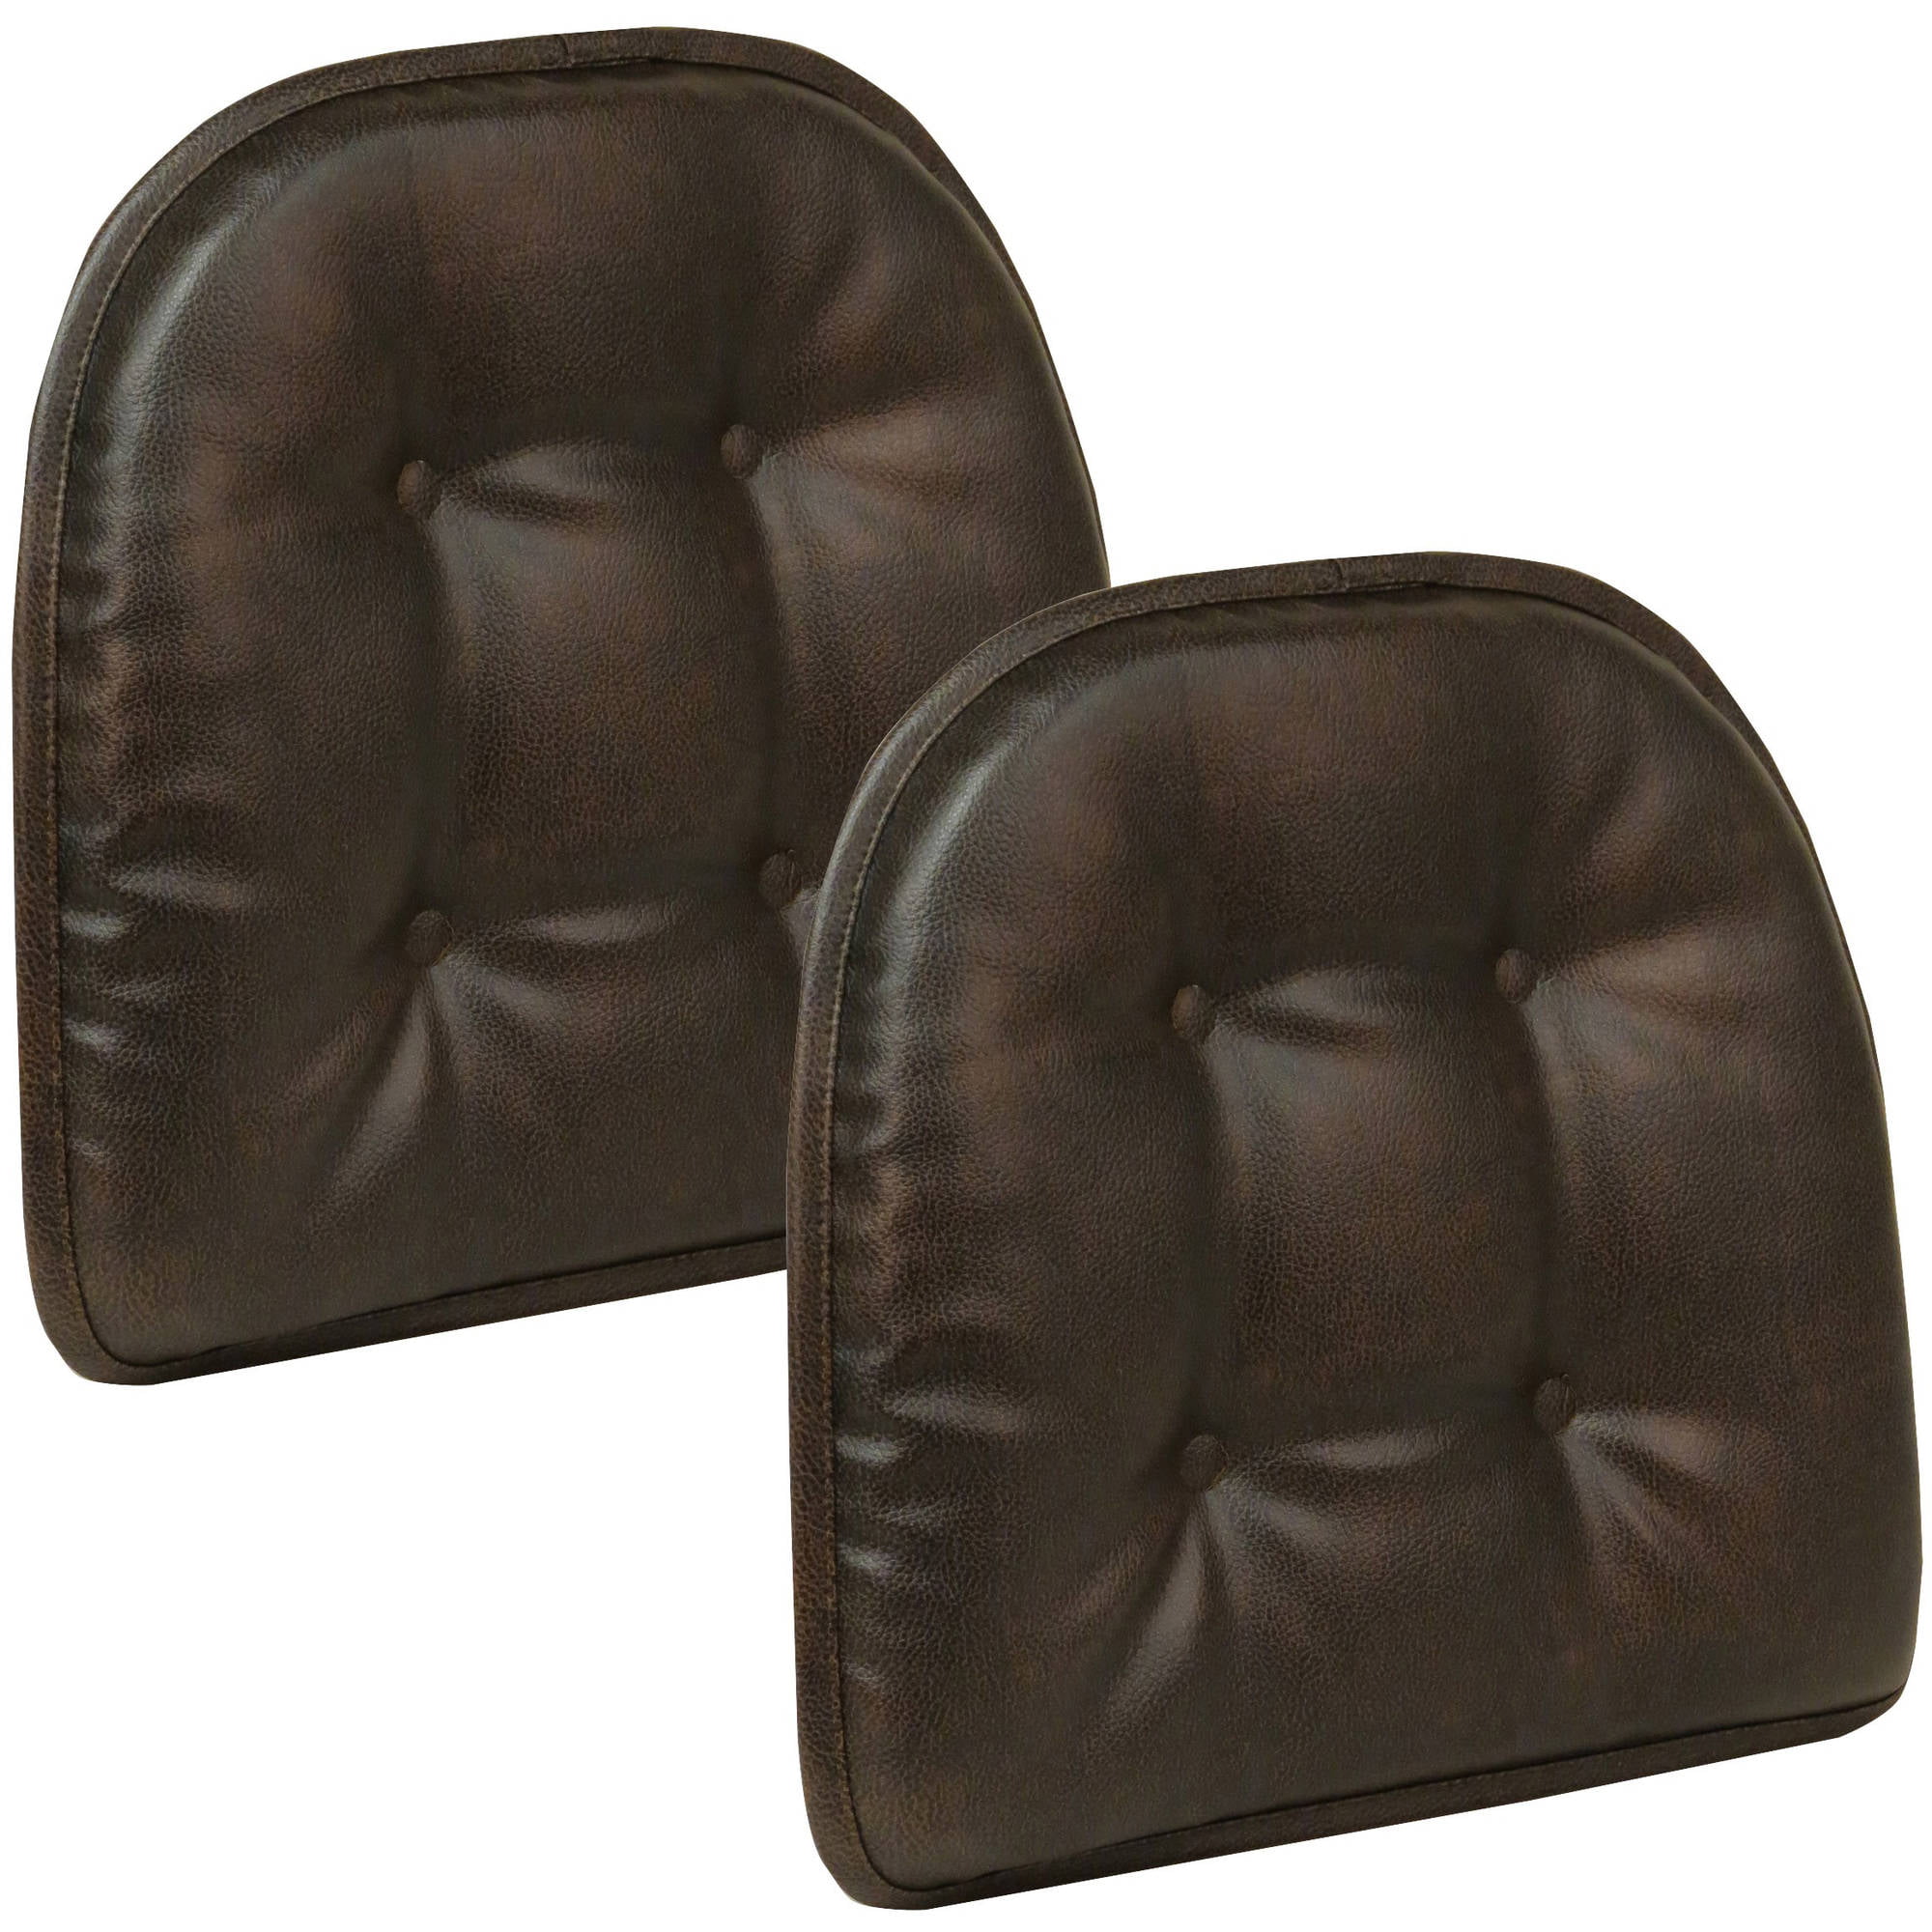 Leather Tufted Chair Cushions Gripper Non Slip 15" x 16" Faux Set of 2 Black 